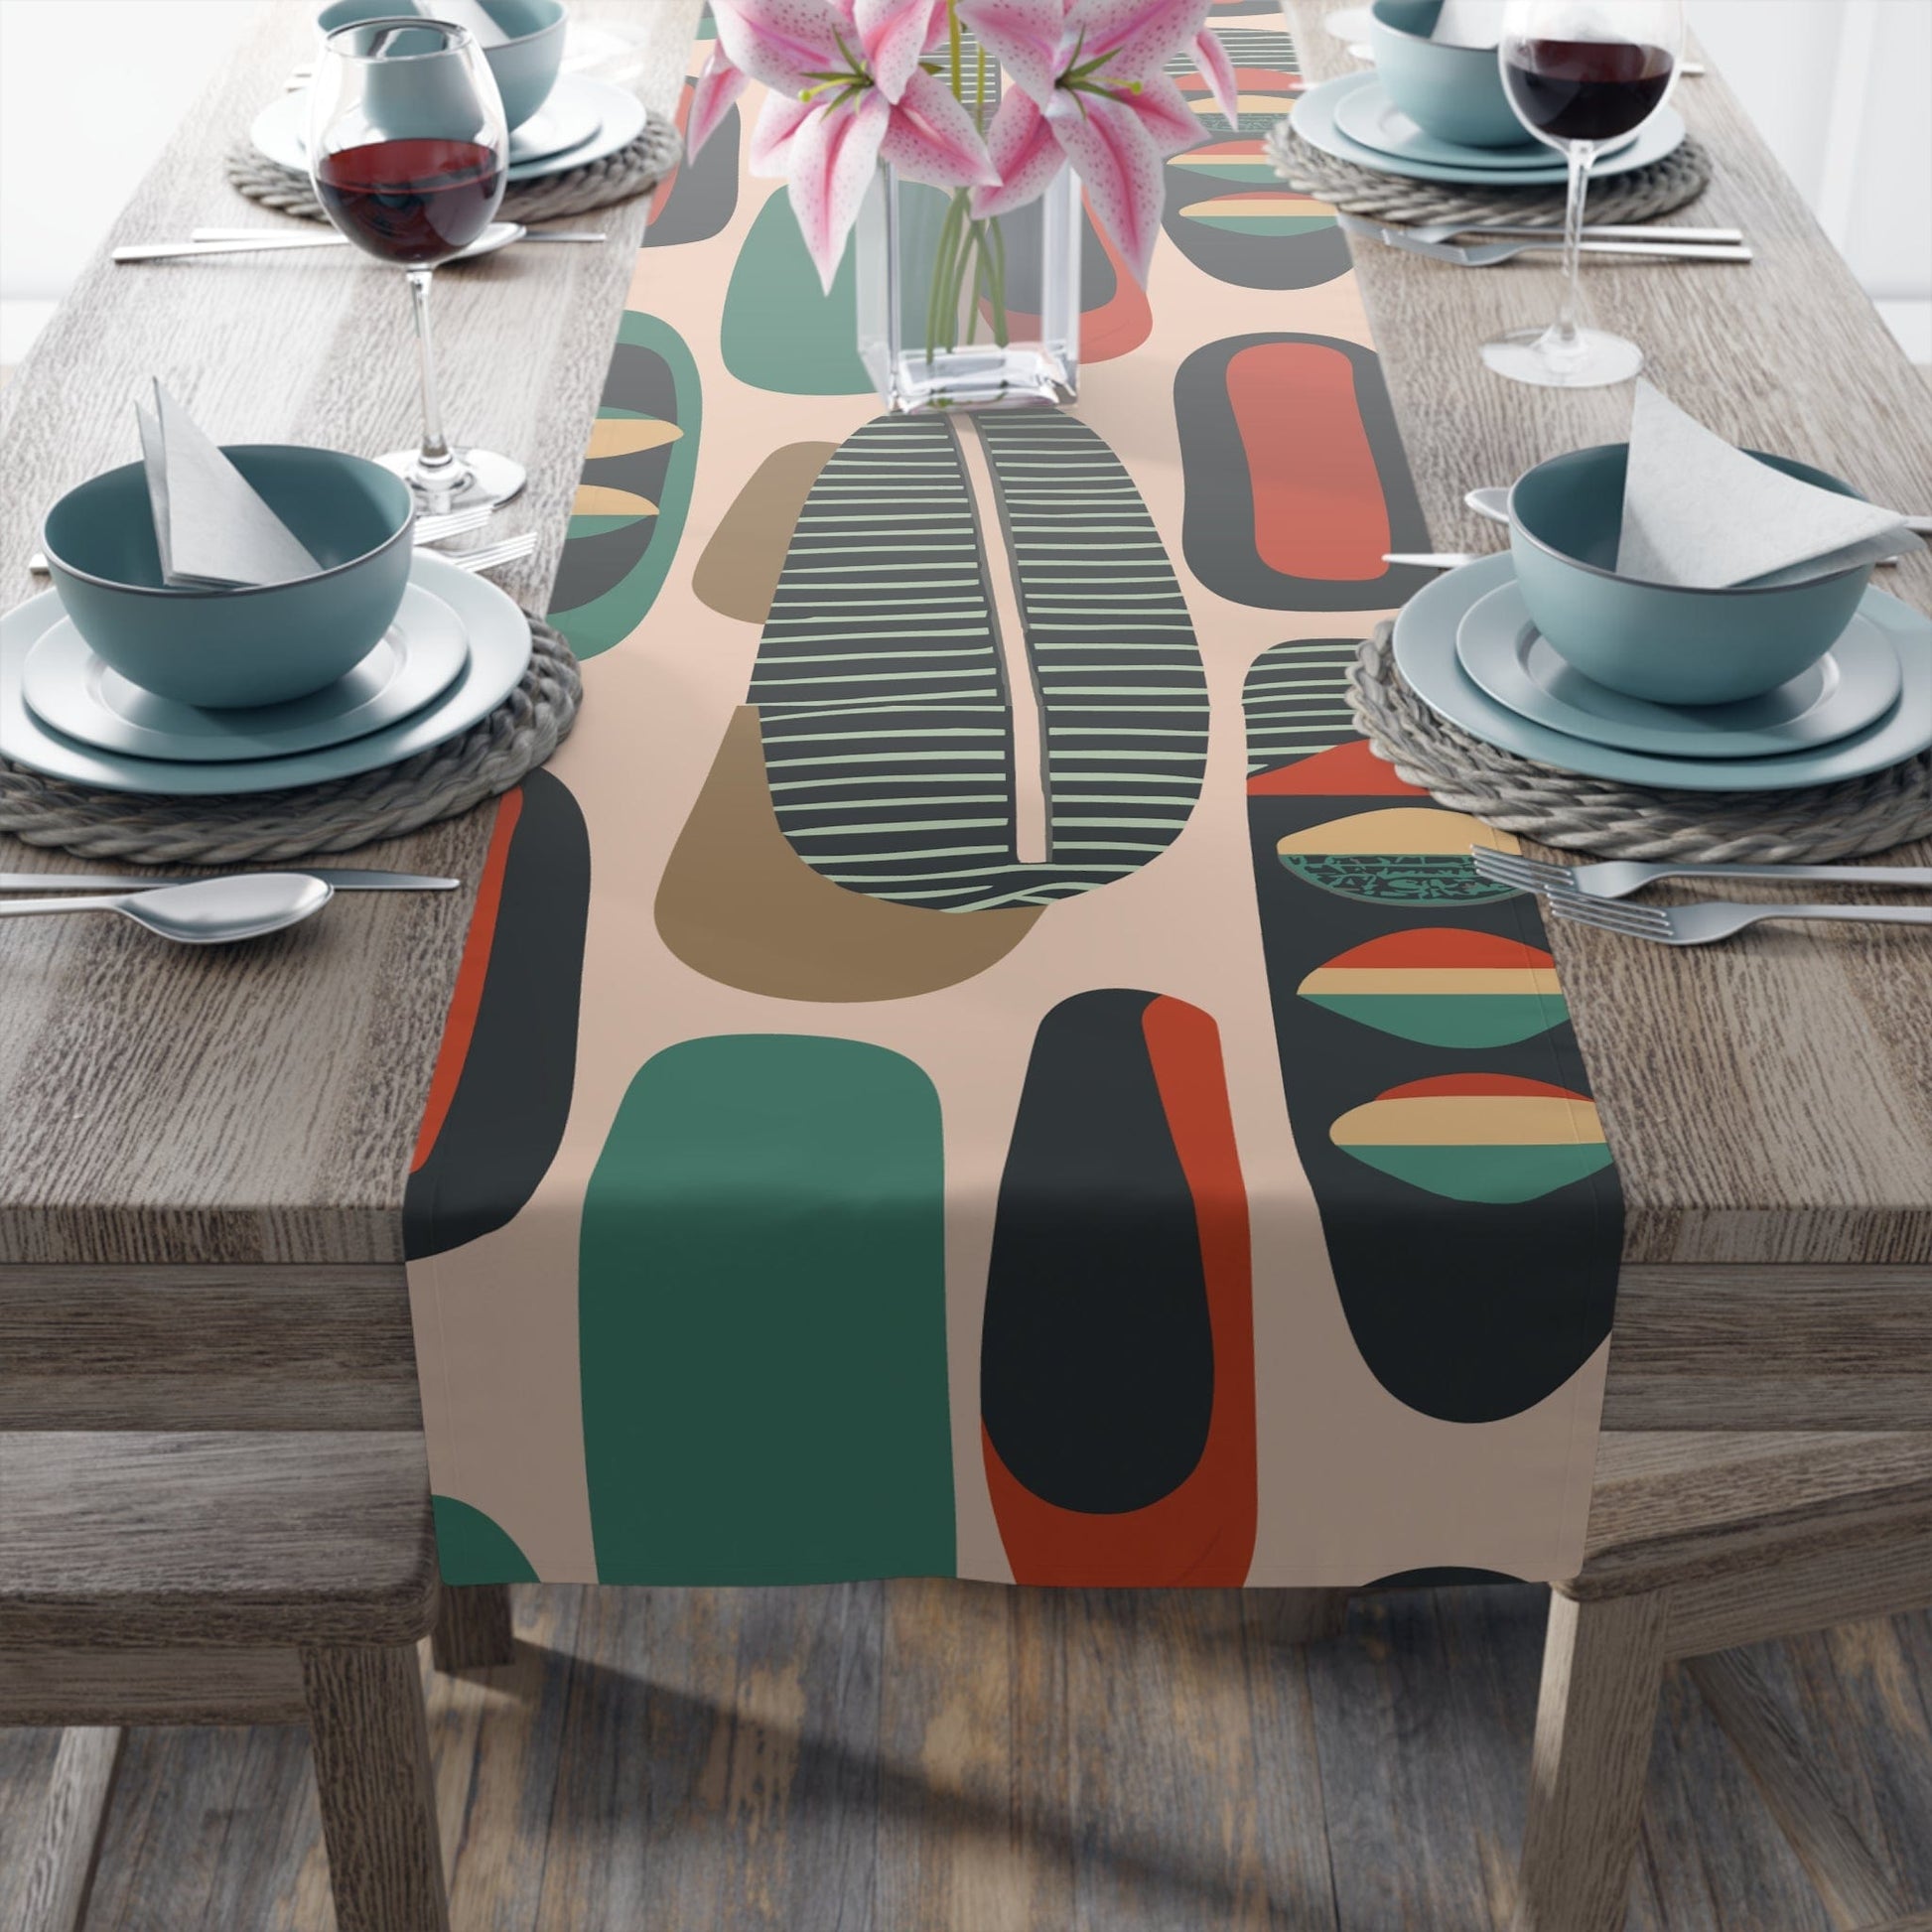 Kate McEnroe New York Retro Mod Table Runner, MCM Geometric Dining Decor, Abstract Shapes Table Linen, Mid Century Modern Table Accessory Table Runners 16" × 90" / Polyester 32034221429473875266